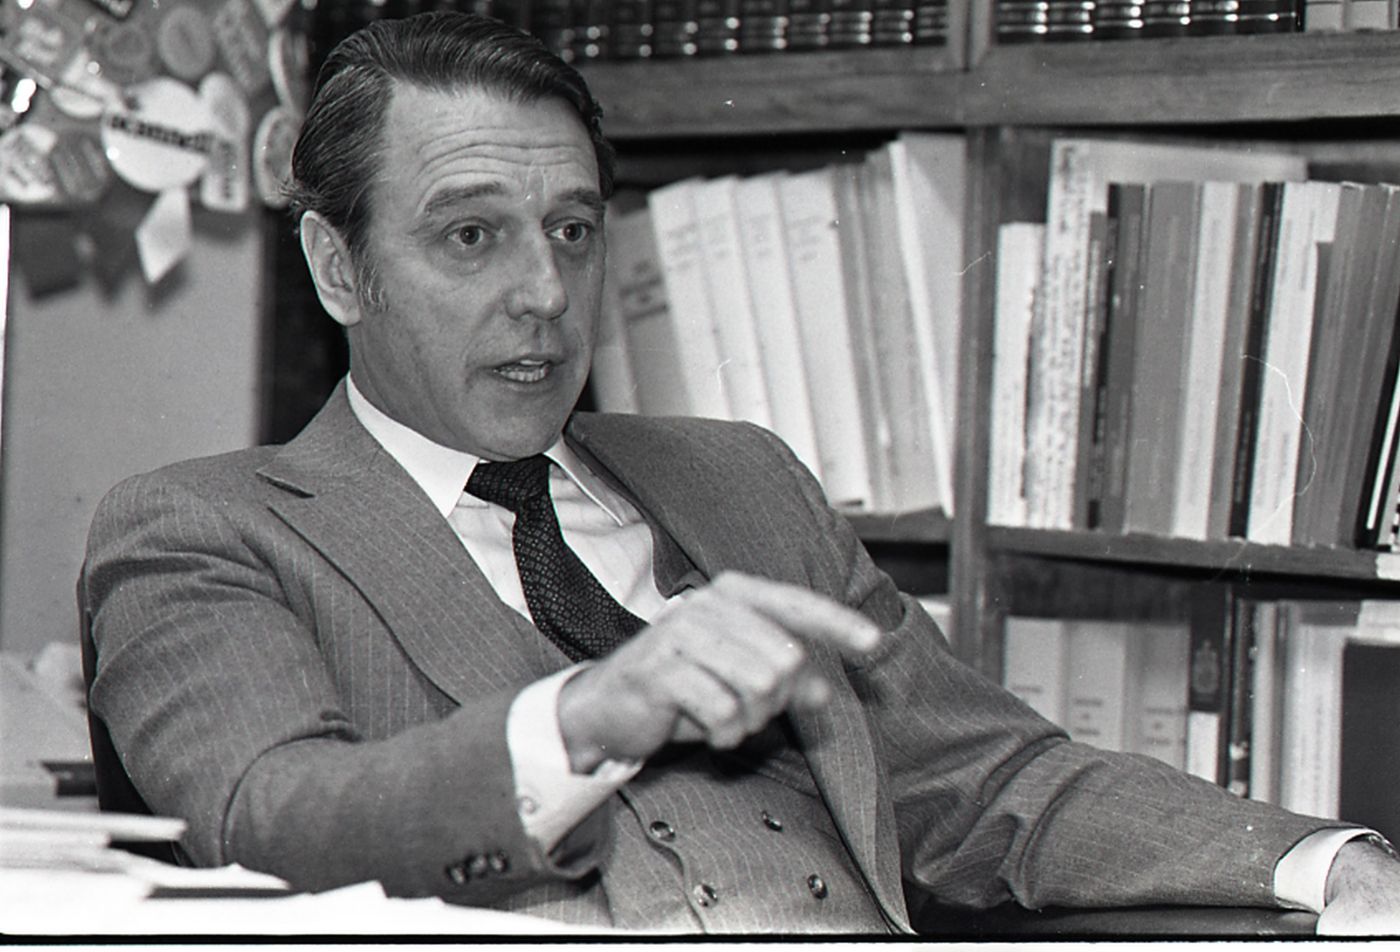 Black and white photograph, three-quarter view, of a dark-haired, middle-aged man wearing a grey pin-striped suit, white shirt and dark tie. He is speaking, pointing with his index finger. Behind him, a bookshelf and part of a bulletin board.